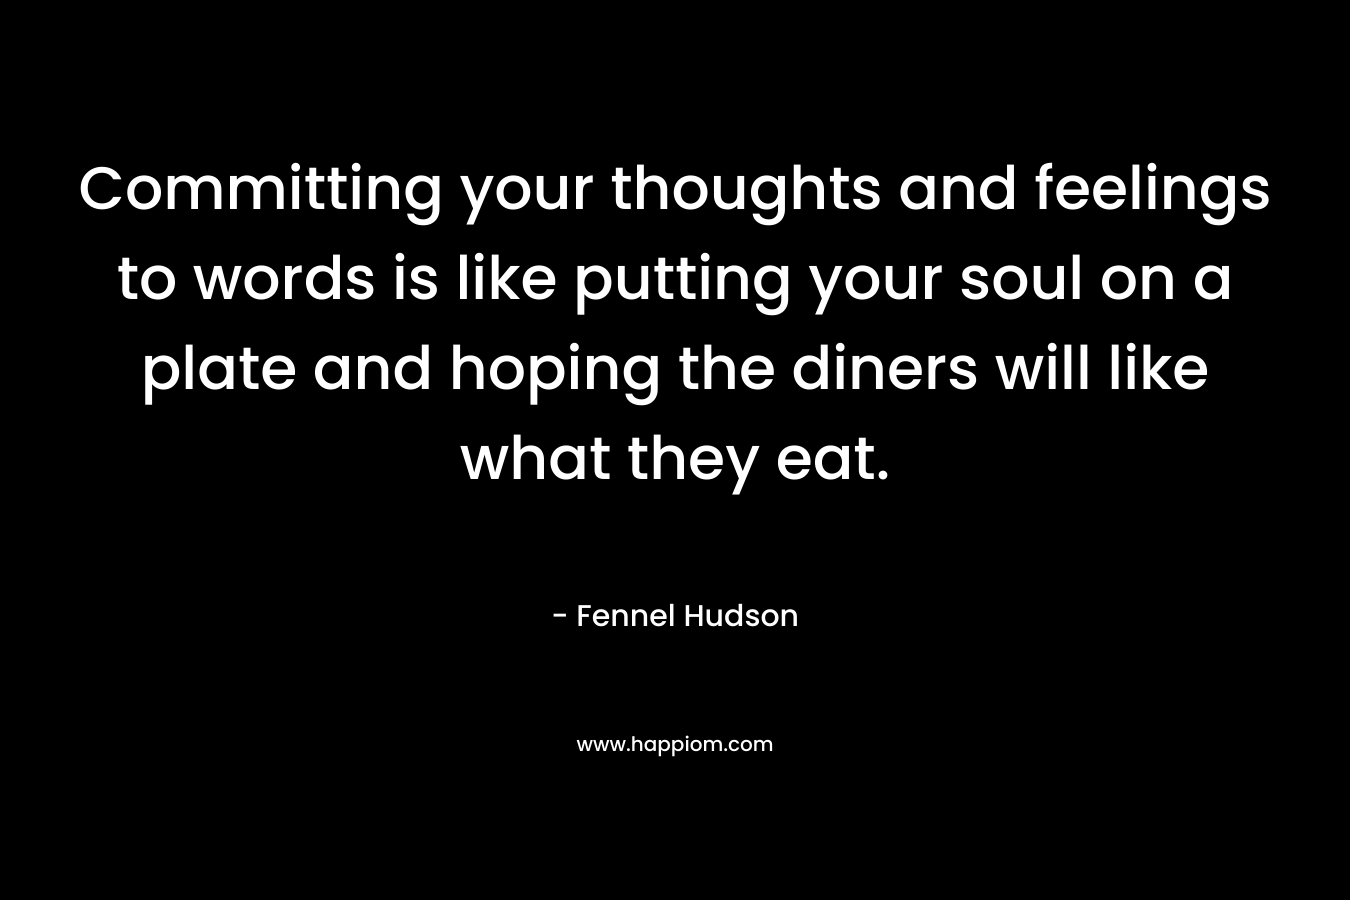 Committing your thoughts and feelings to words is like putting your soul on a plate and hoping the diners will like what they eat. – Fennel Hudson